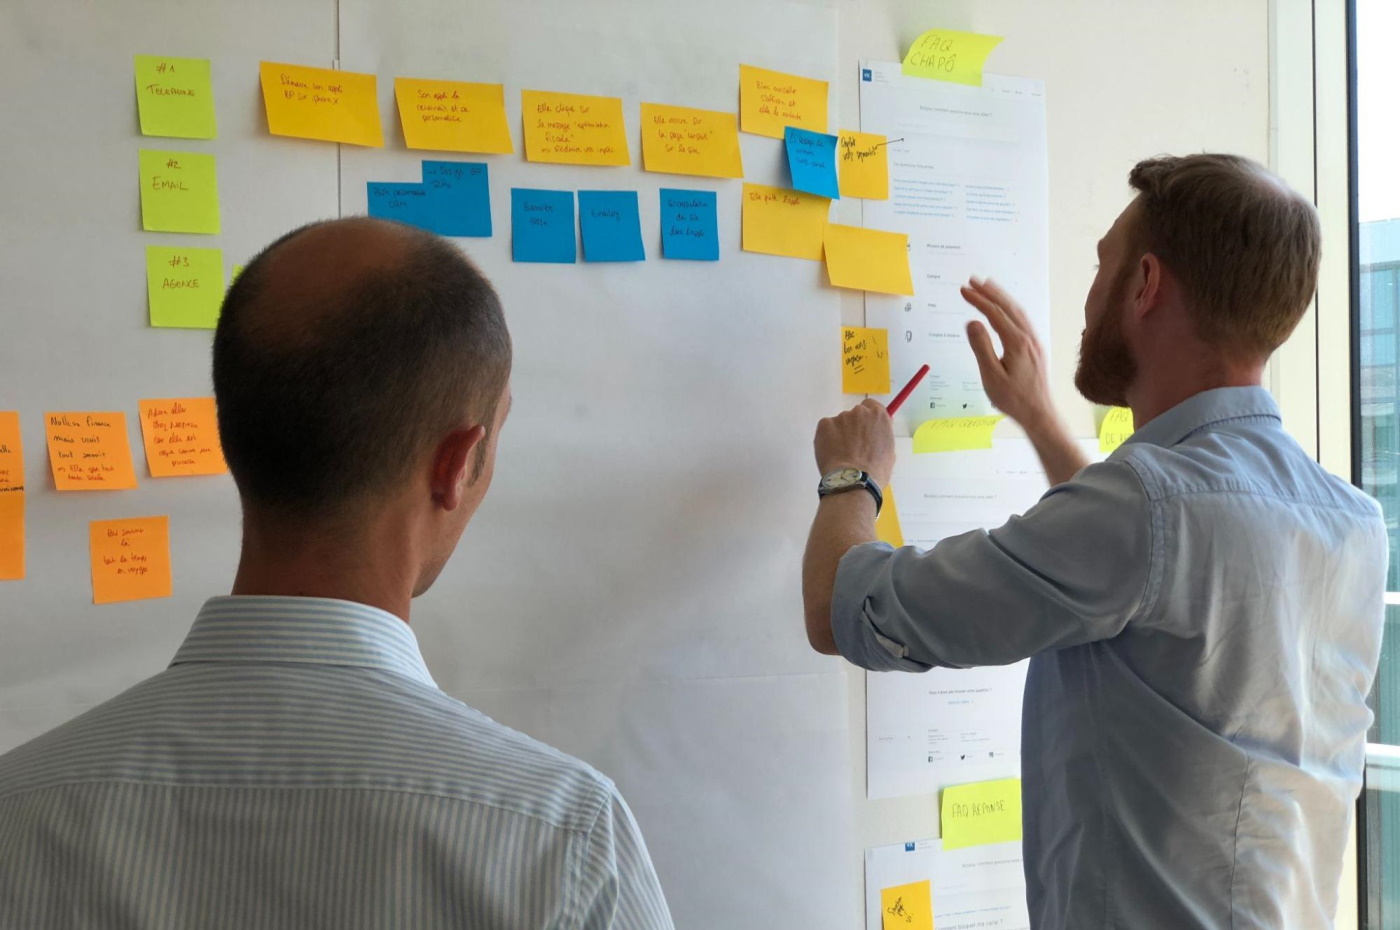 Two developers organize sticky notes on a wall to plan the layout of a program built with a no-code platform.